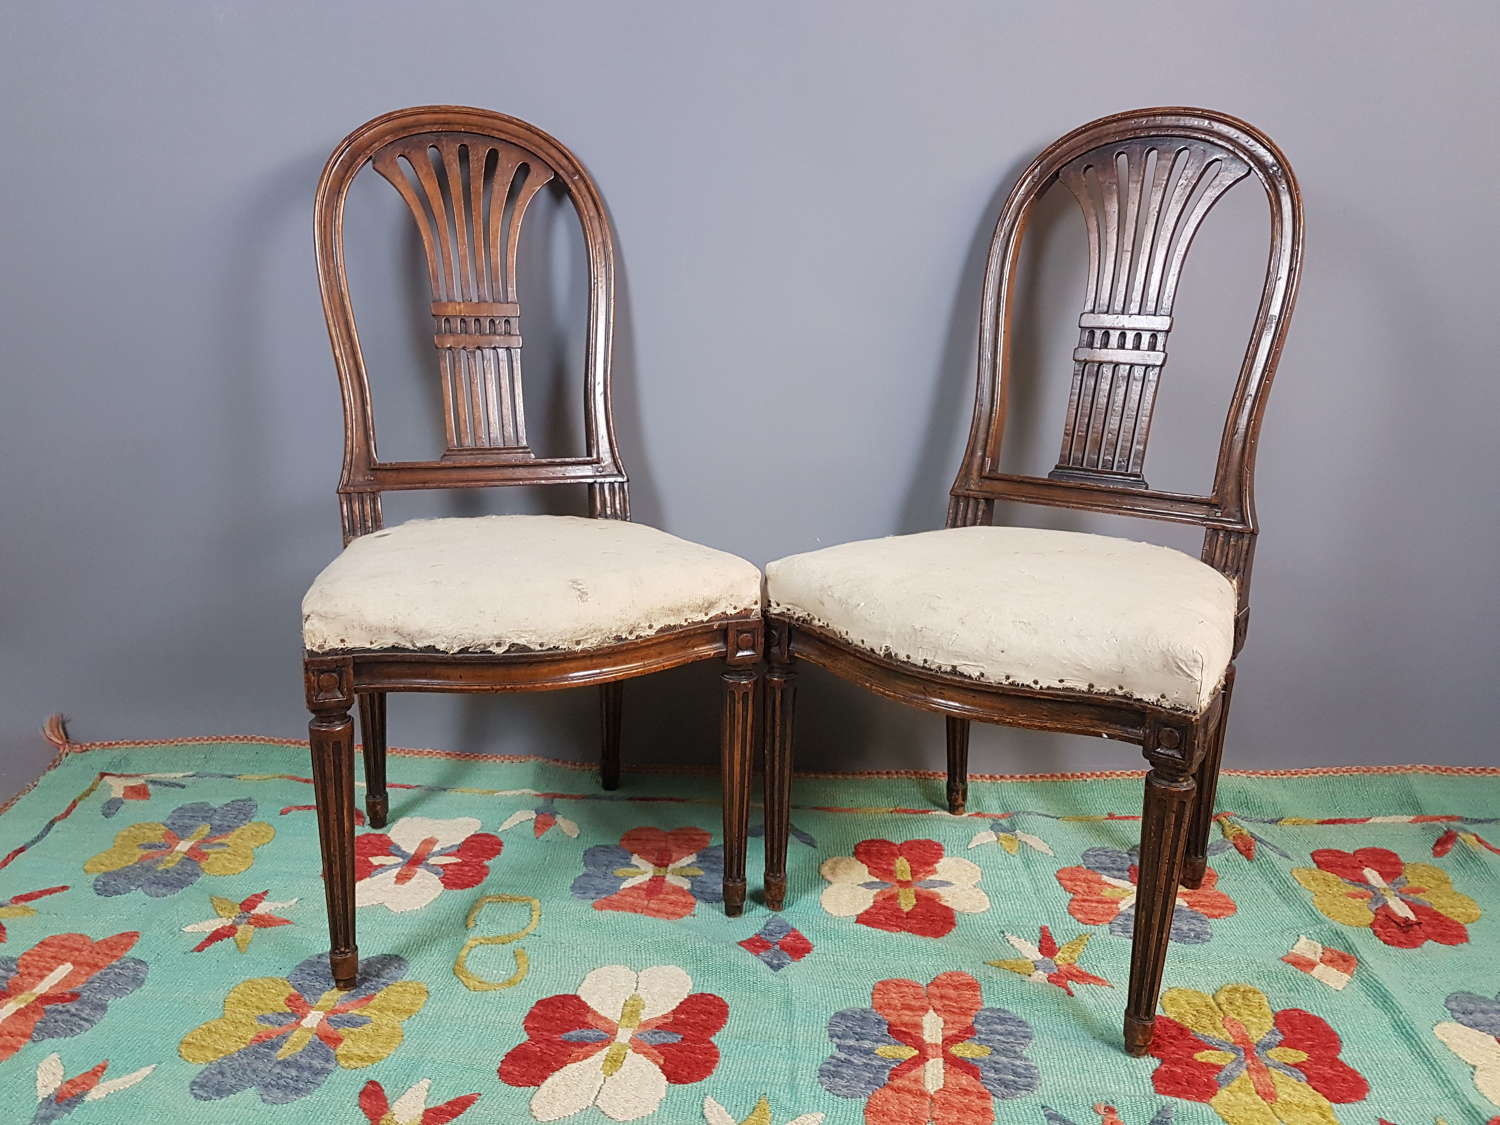 Pair Of Early 20thC Swedish Gustavian Chairs